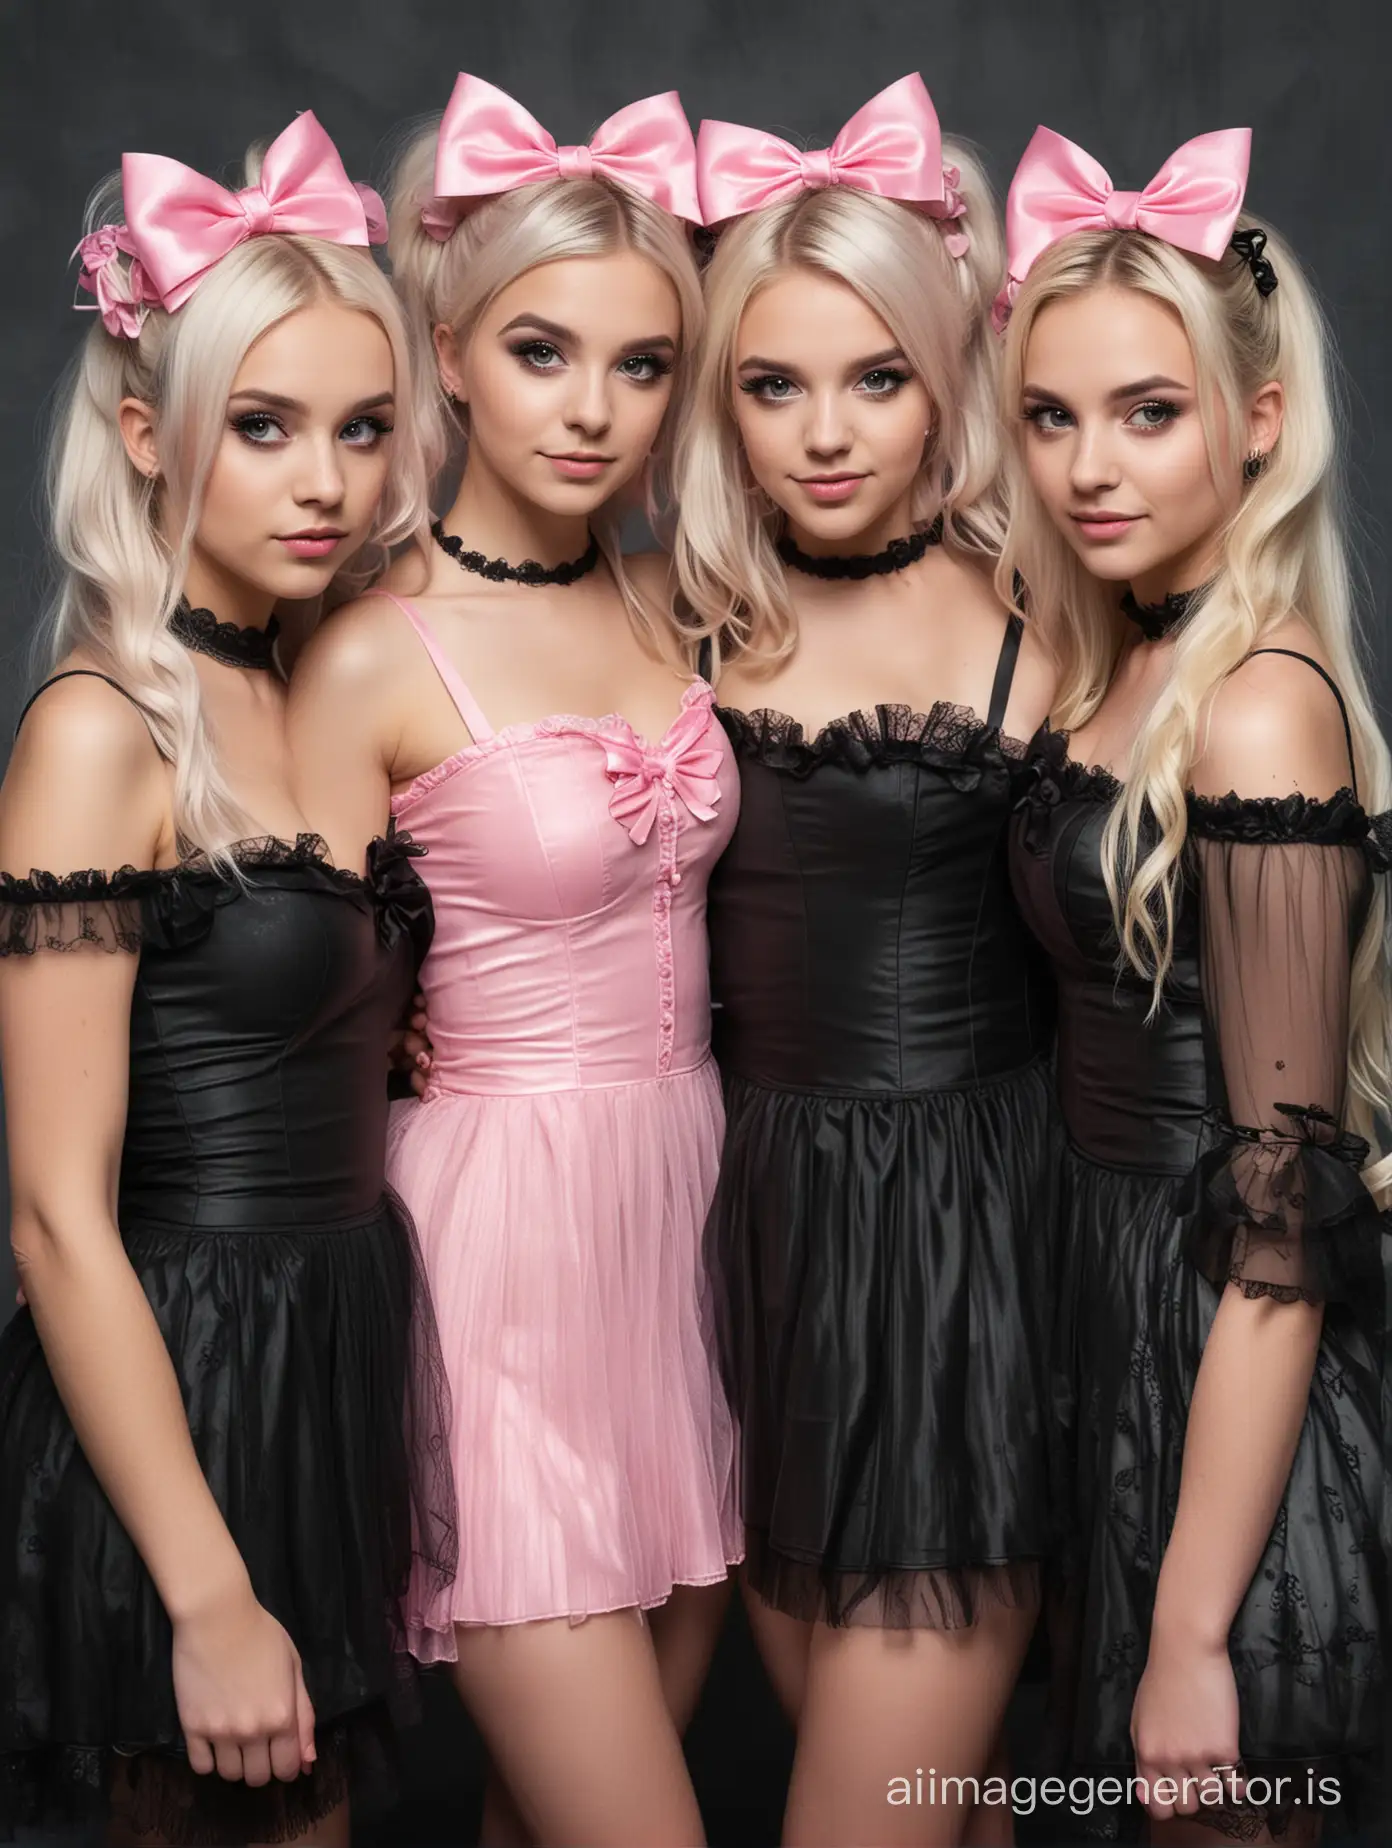 Group picture of 4 girls. 3 blonde girls and one black haired girl.
3 blonde bridesmaids wearing cute pink outfits with pink bows in their hair
1 mysterious goth girl wearing black revealing sheer clothing, nothing in her black/blue hair